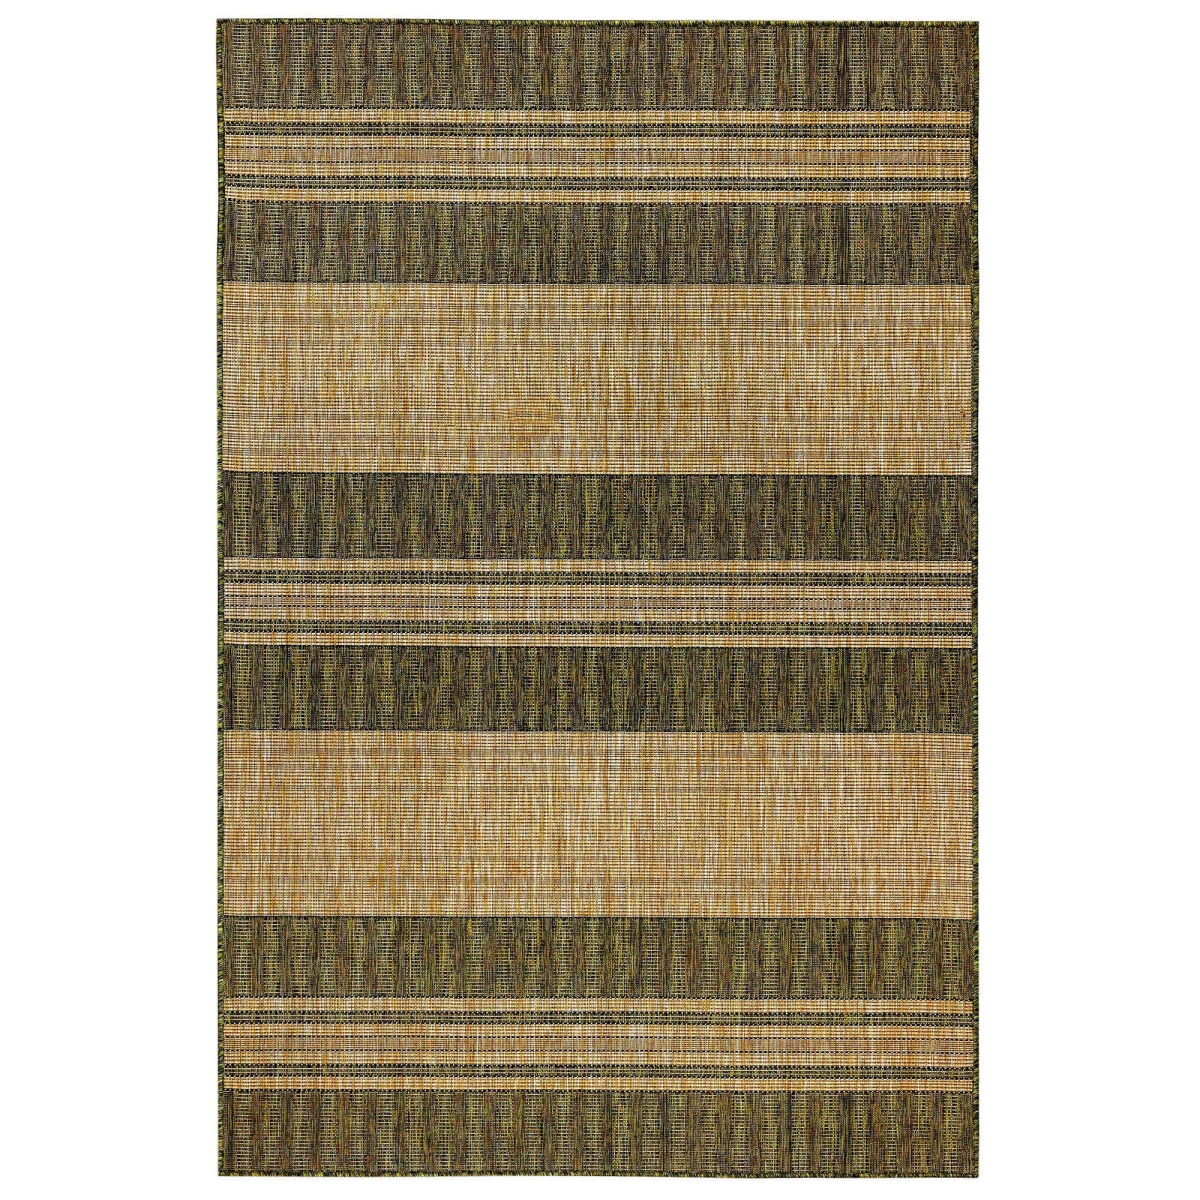 Trans-ocean Imports Cre58843506 4 Ft. 10 In. X 7 Ft. 6 In. Liora Manne Carmel Stripe Indoor & Outdoor Wilton Woven Rectangle Rug - Green